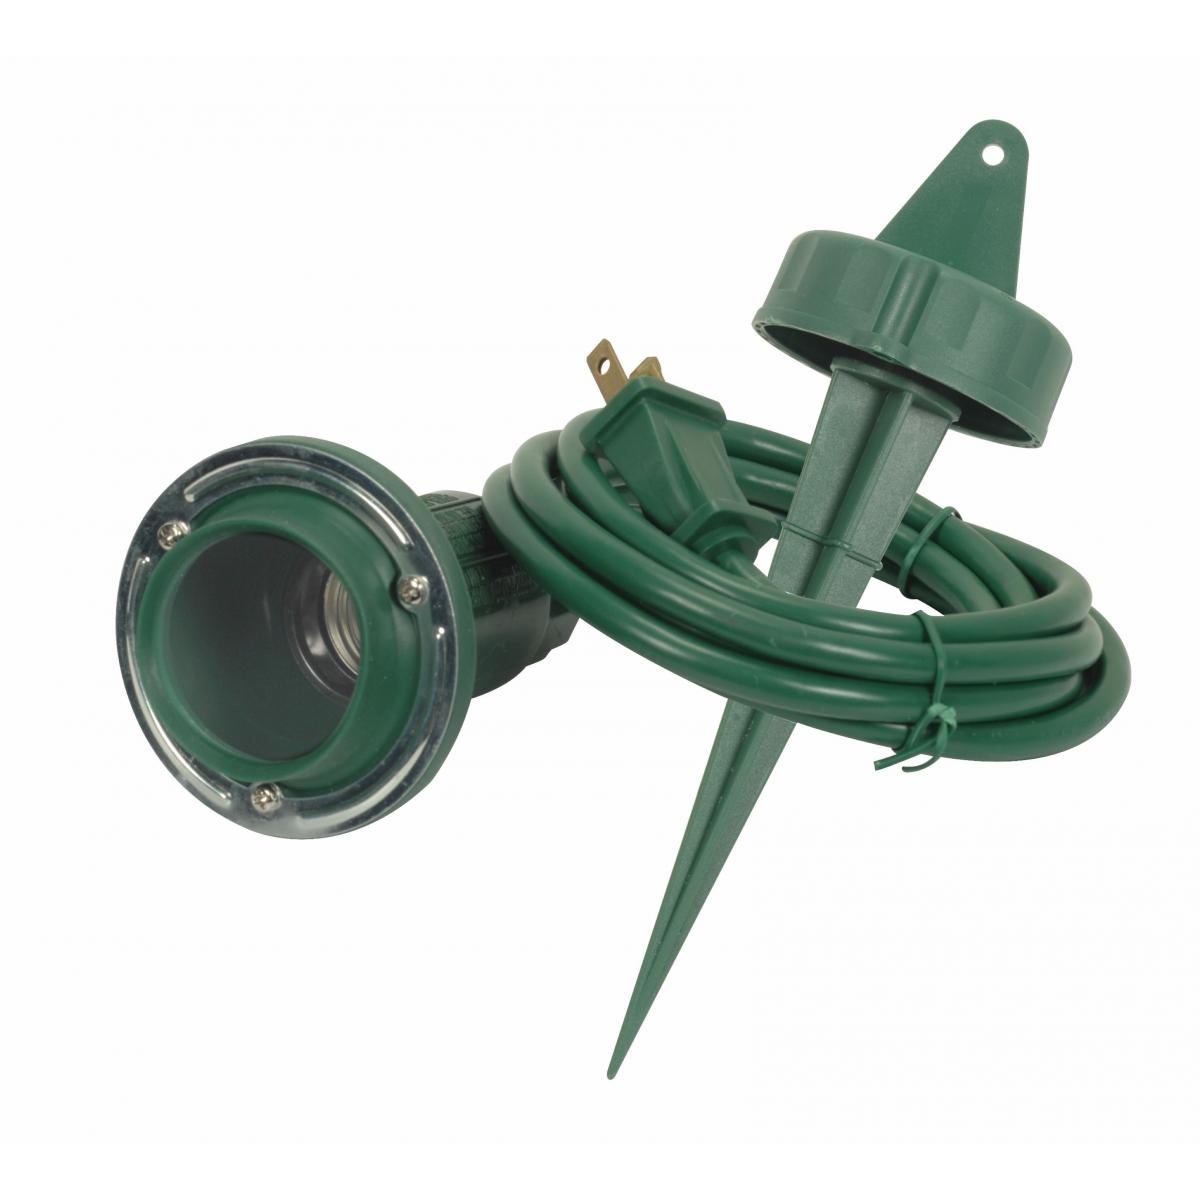 Satco 77-325 Single Plastic Flood Light With Round Plate For Dual Mounting And Ground Stake With 6 ft. Cord - Green Finish